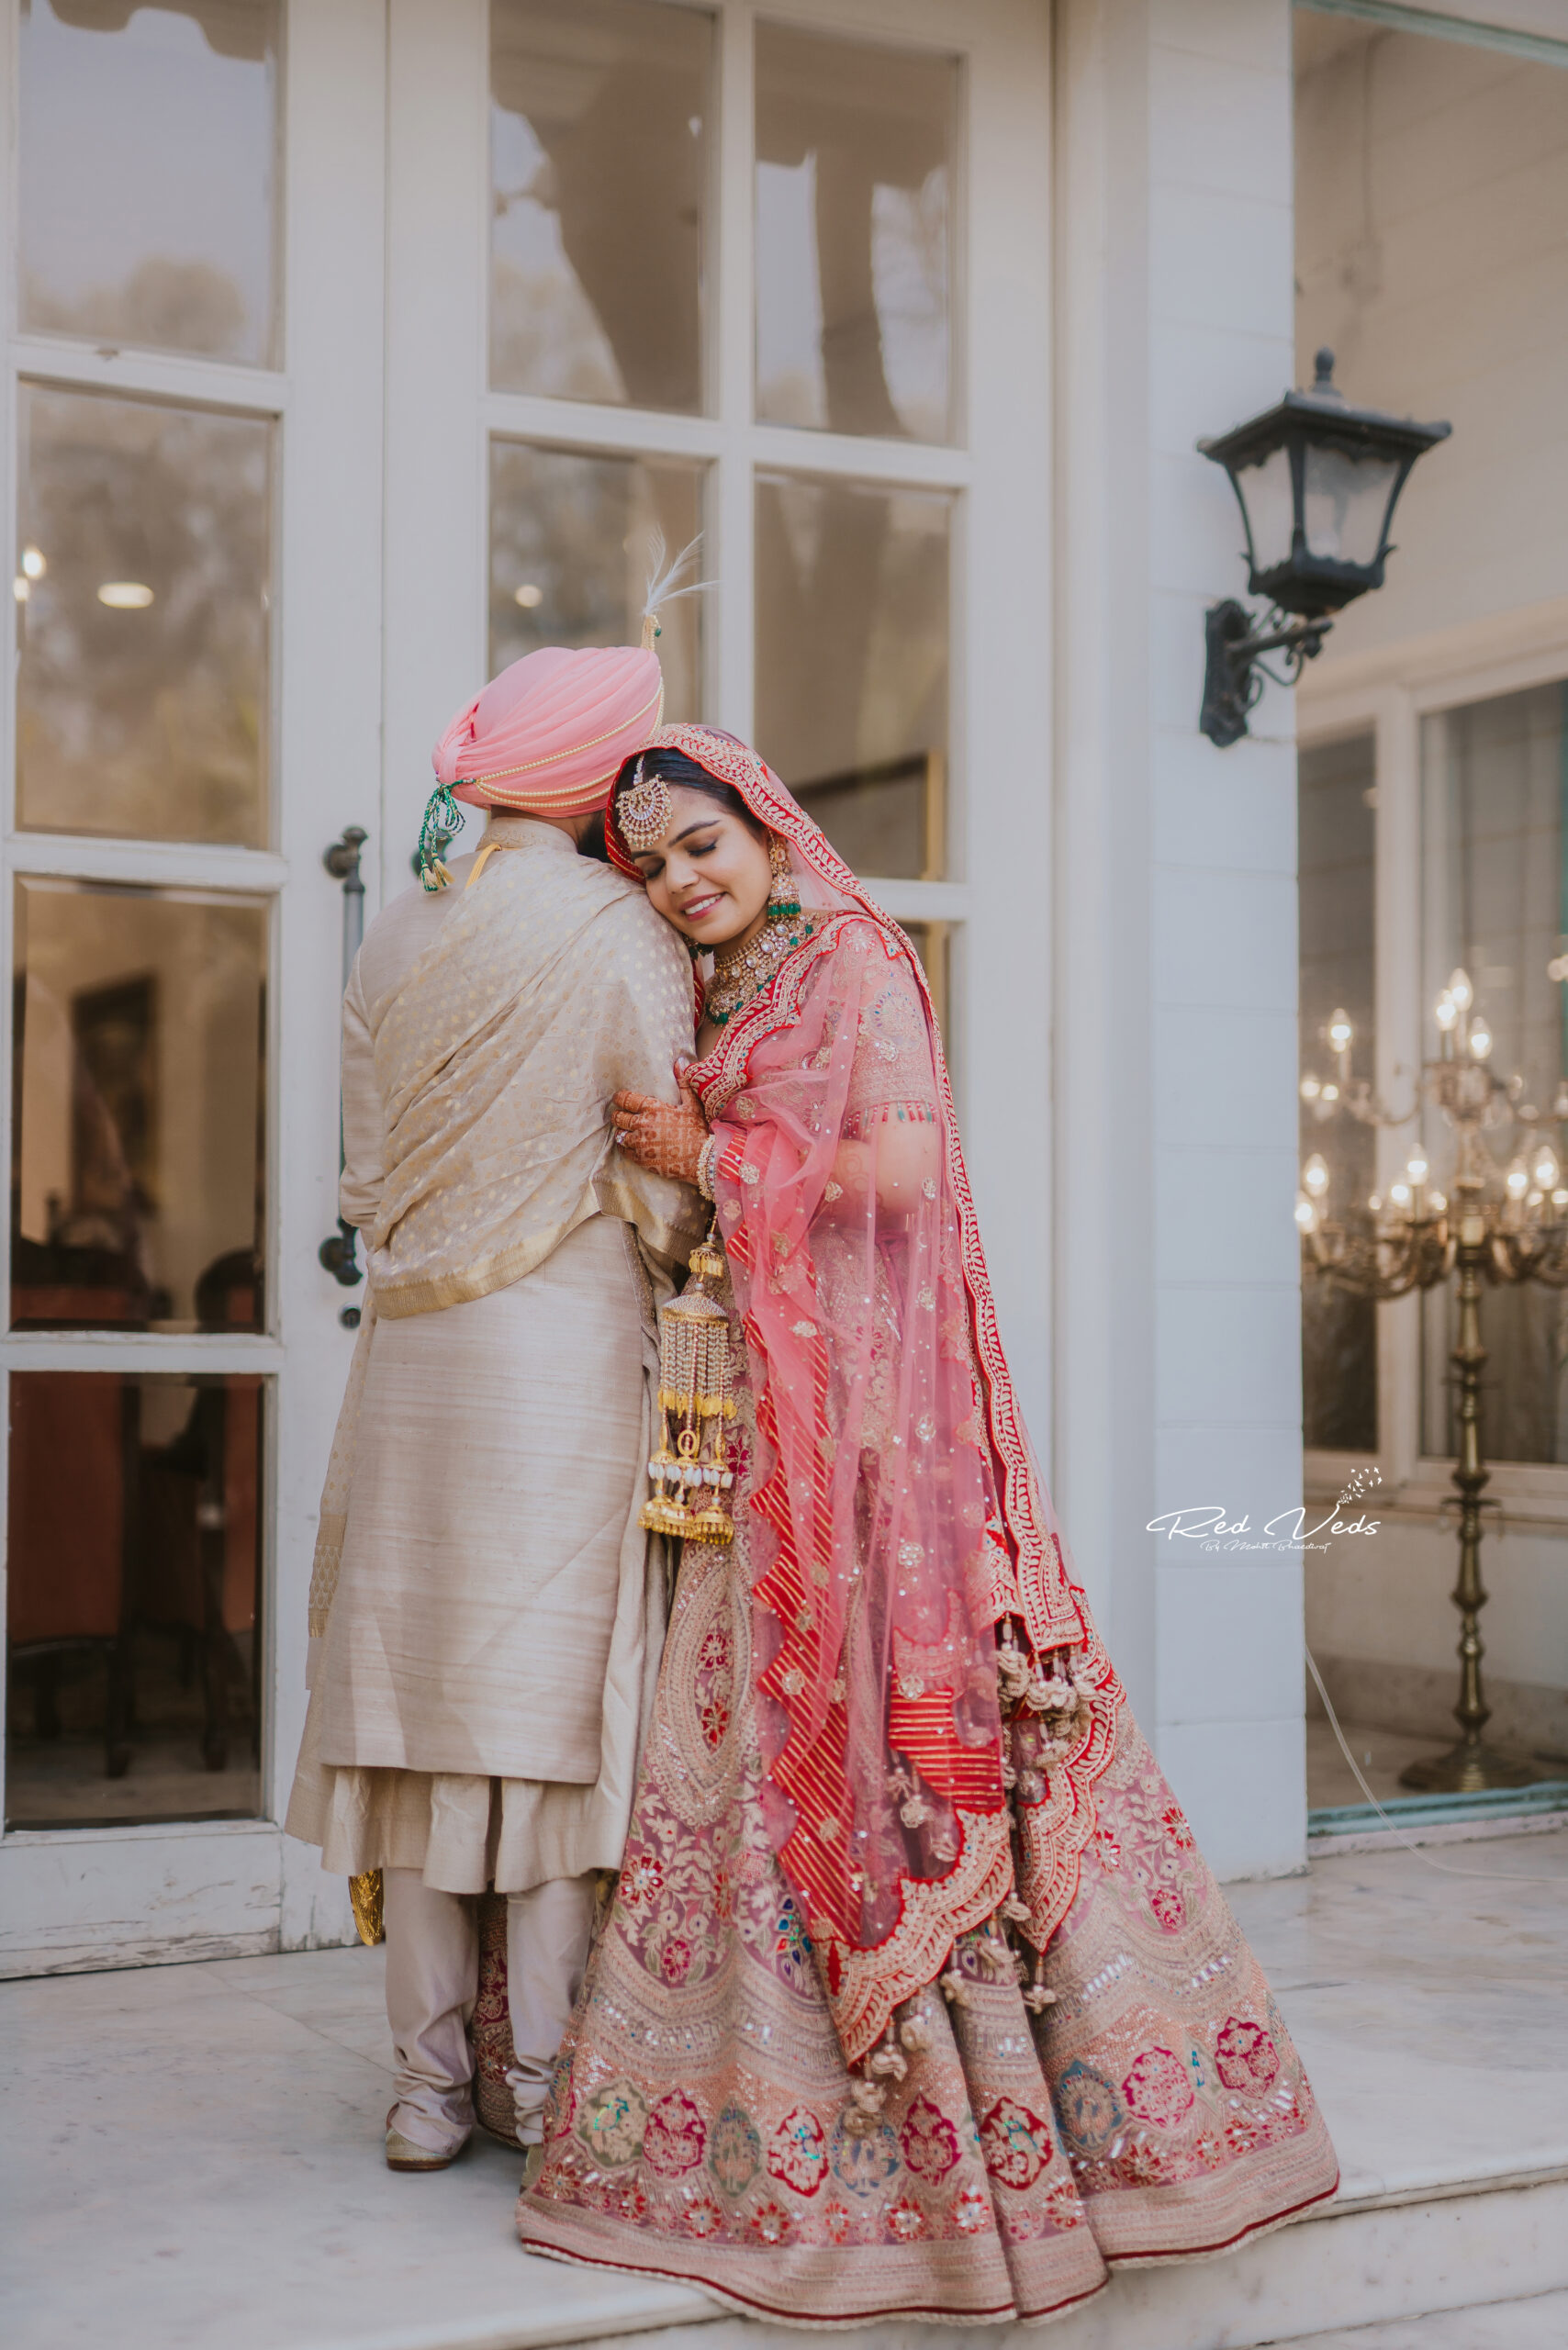 Wedding Photographer in India | Get a quote for Wedding shoots